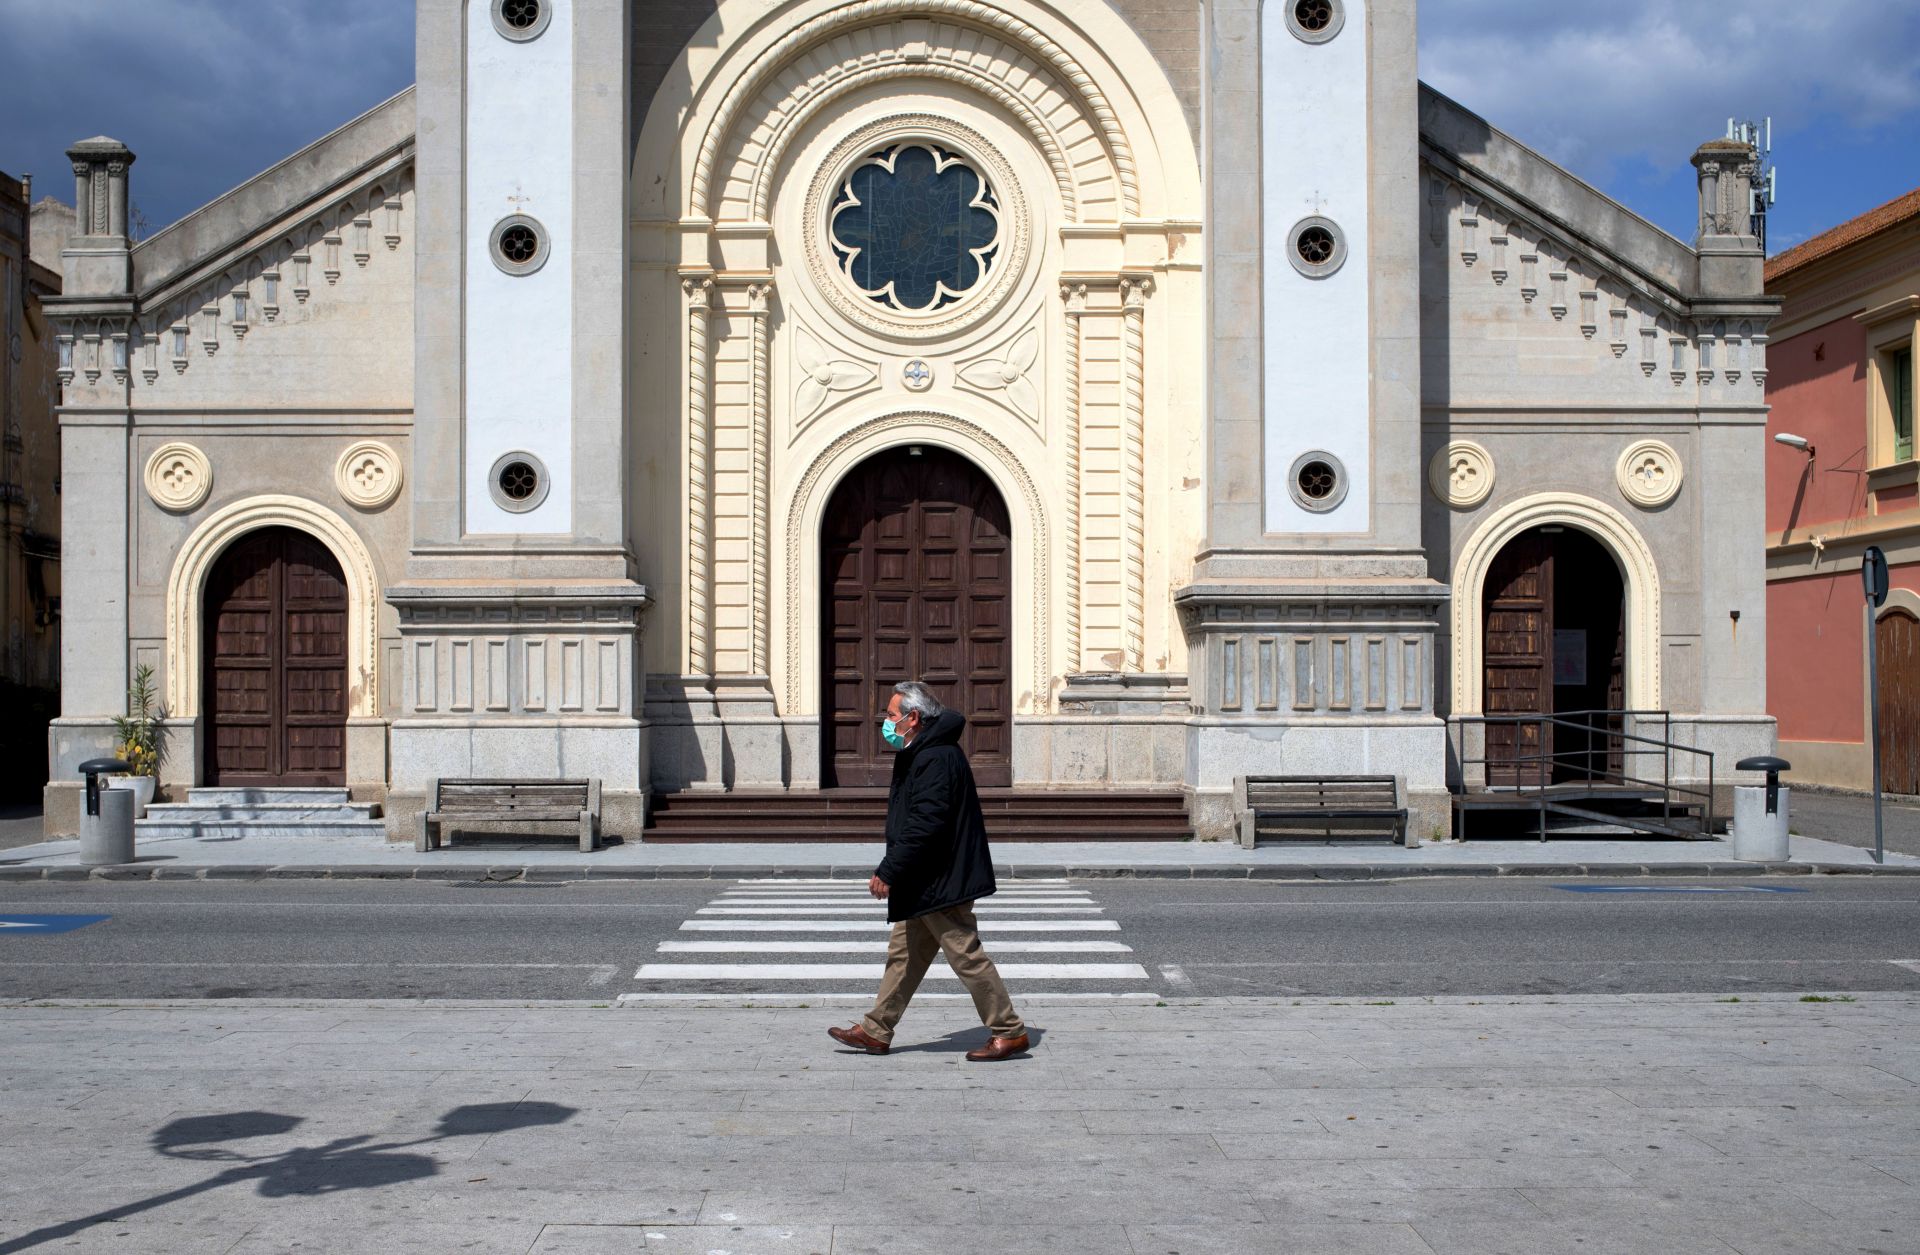 A man wearing a protective mask walks in the empty square in front of a cathedral in Locri, Italy, on April 7, 2020. 